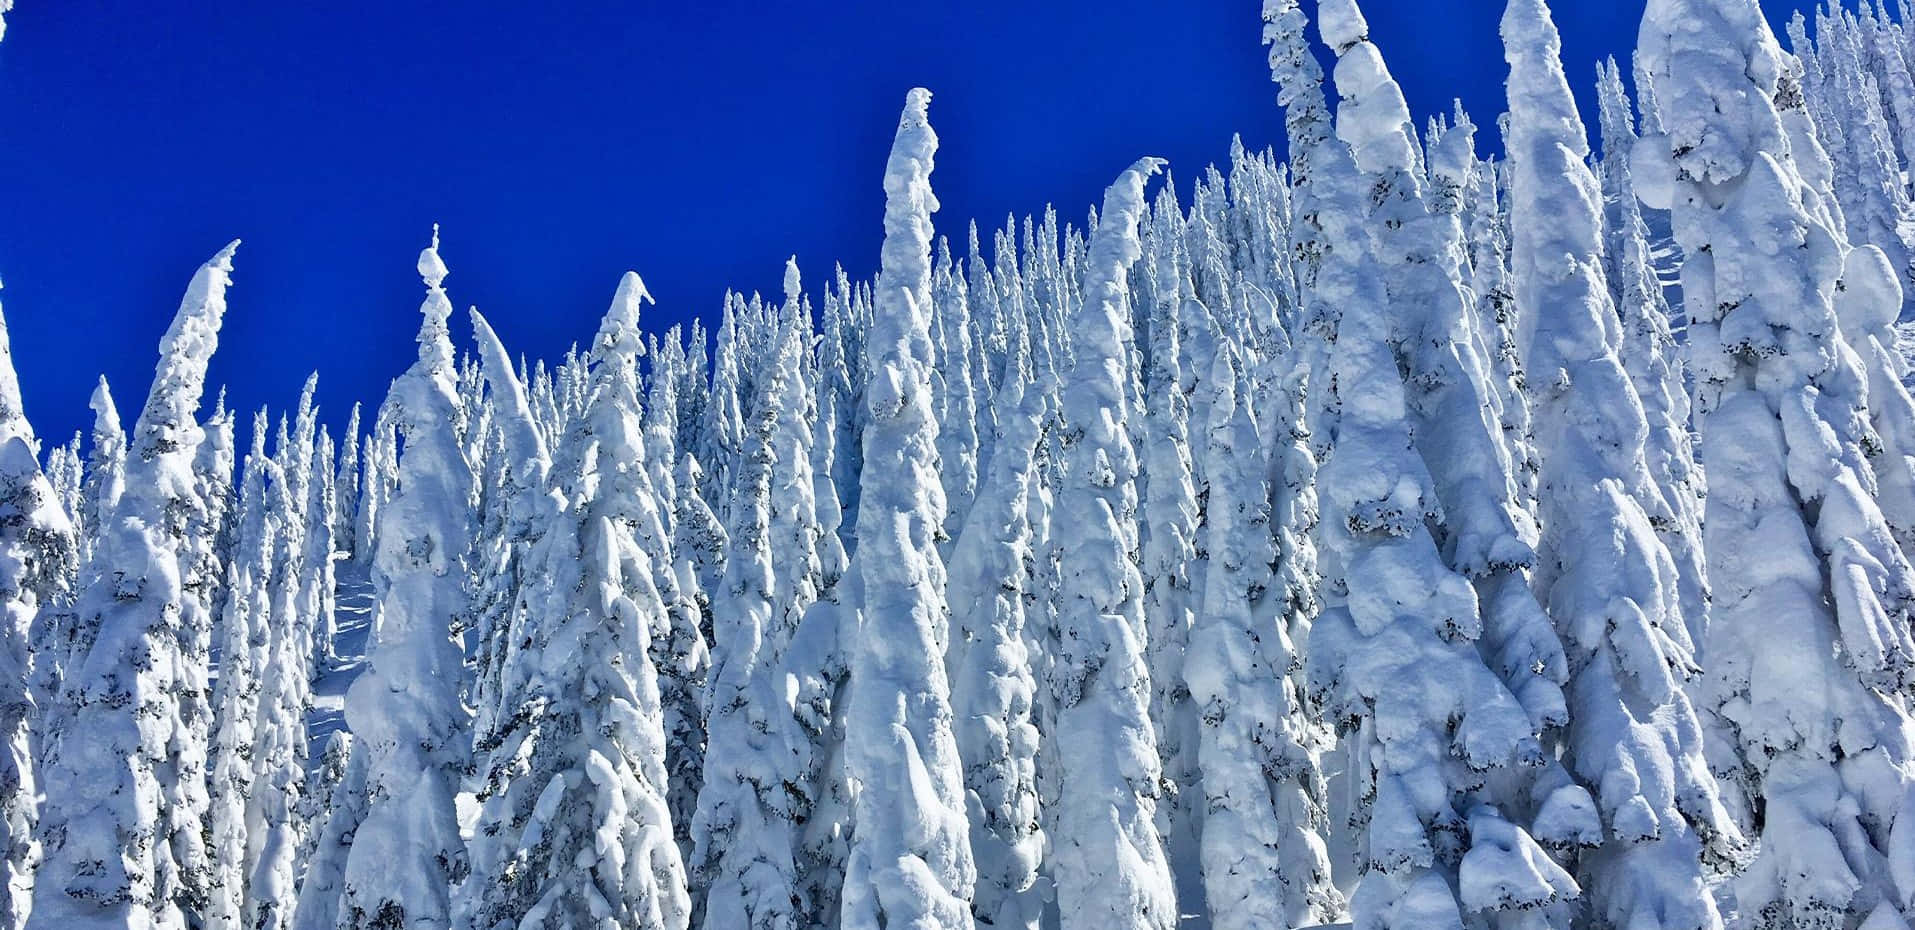 A Group Of Trees Covered In Snow Against A Blue Sky